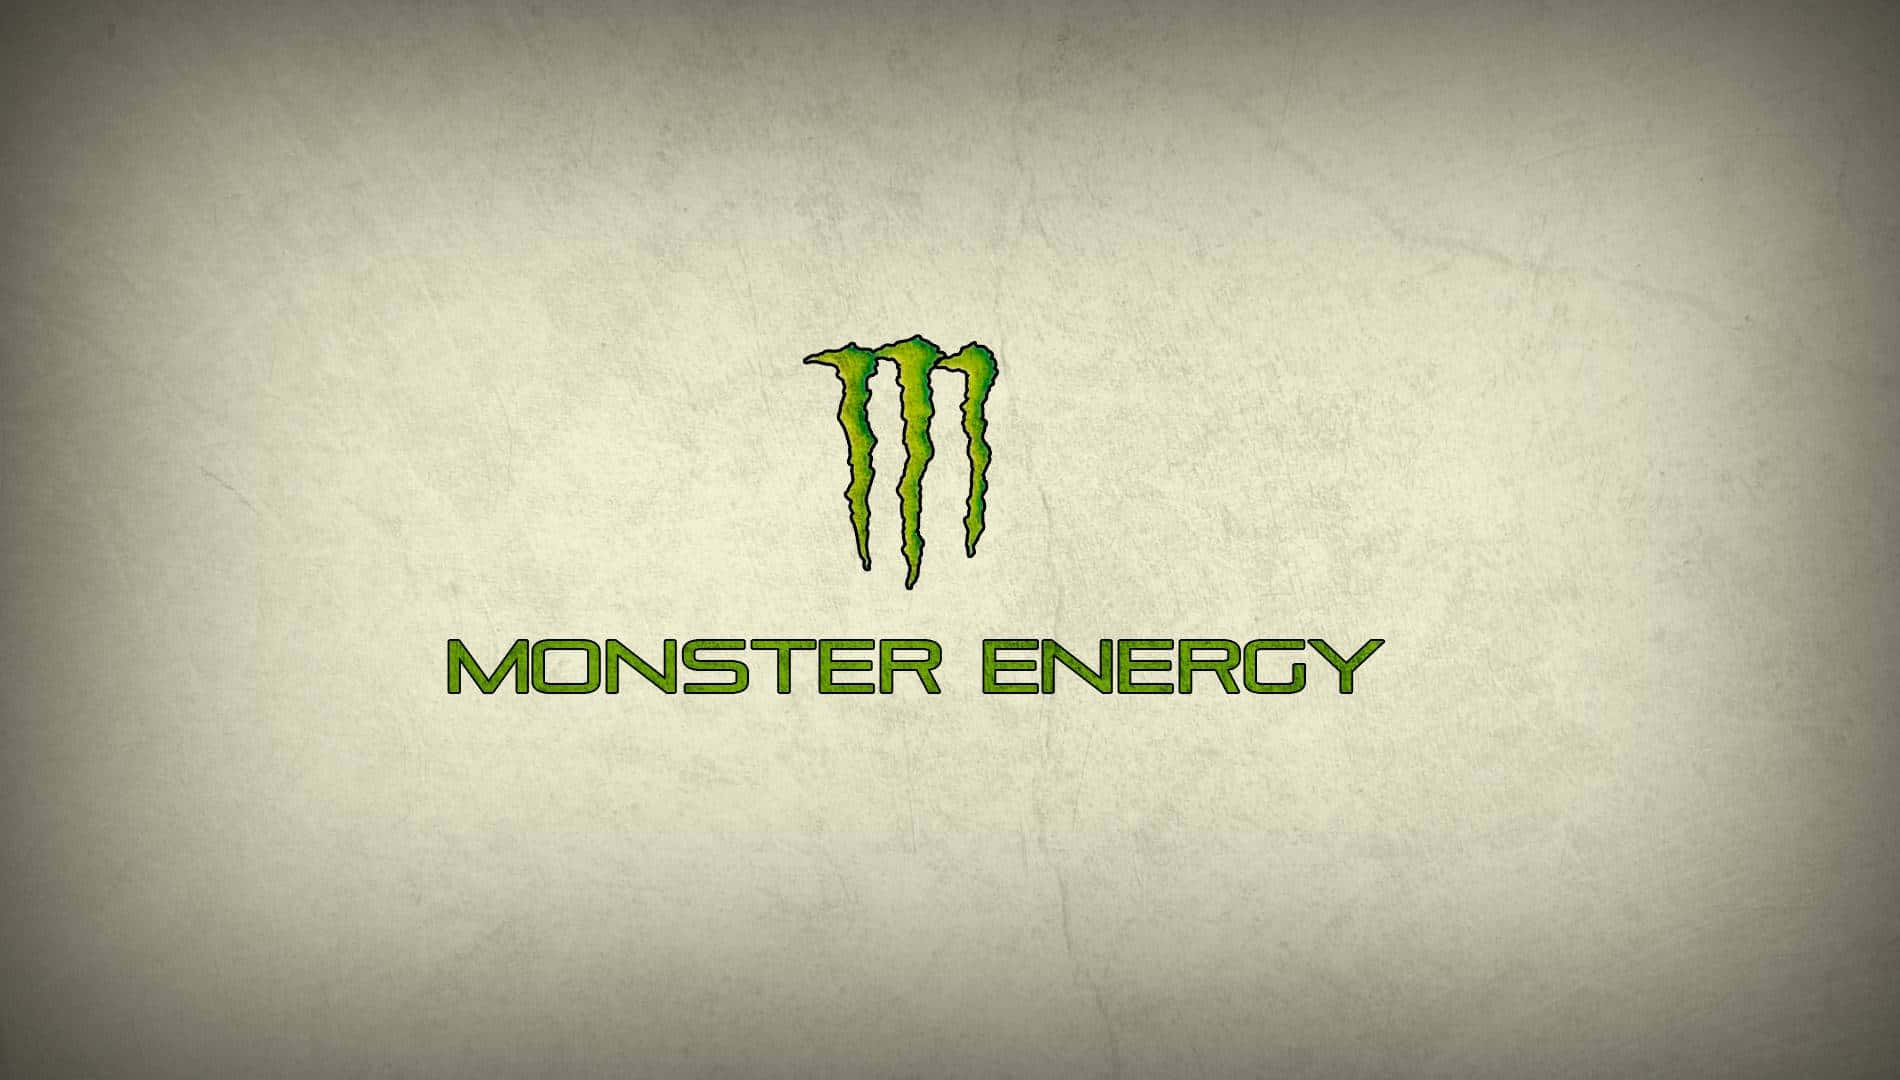 Unleash the Beast with this electrifying Monster Energy Wallpaper